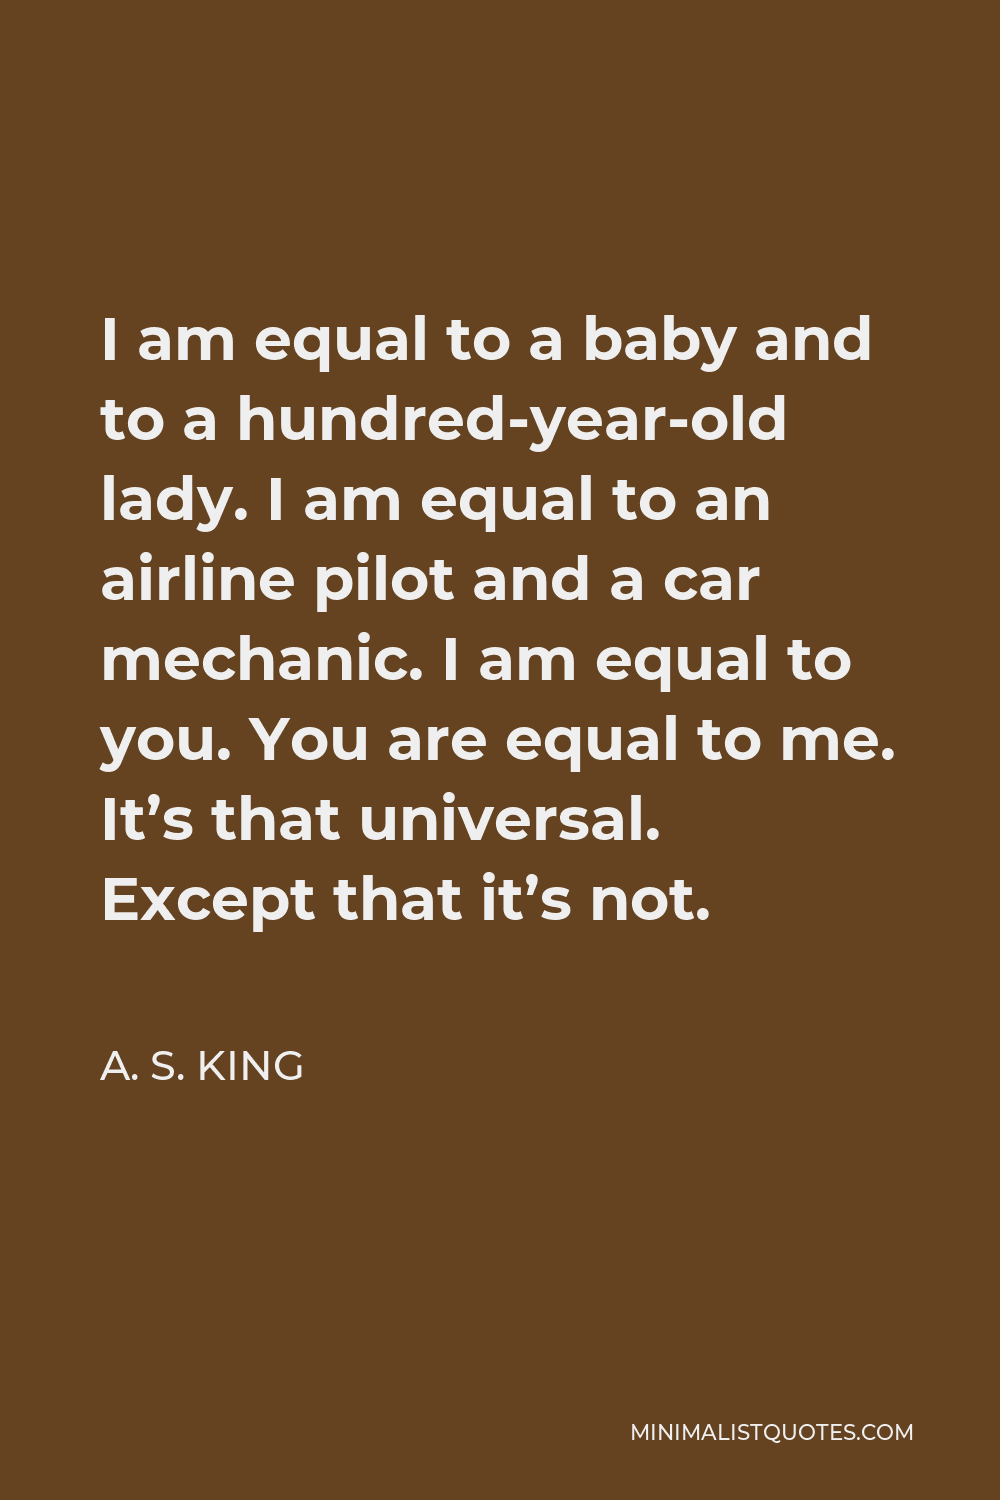 A. S. King Quote - I am equal to a baby and to a hundred-year-old lady. I am equal to an airline pilot and a car mechanic. I am equal to you. You are equal to me. It’s that universal. Except that it’s not.